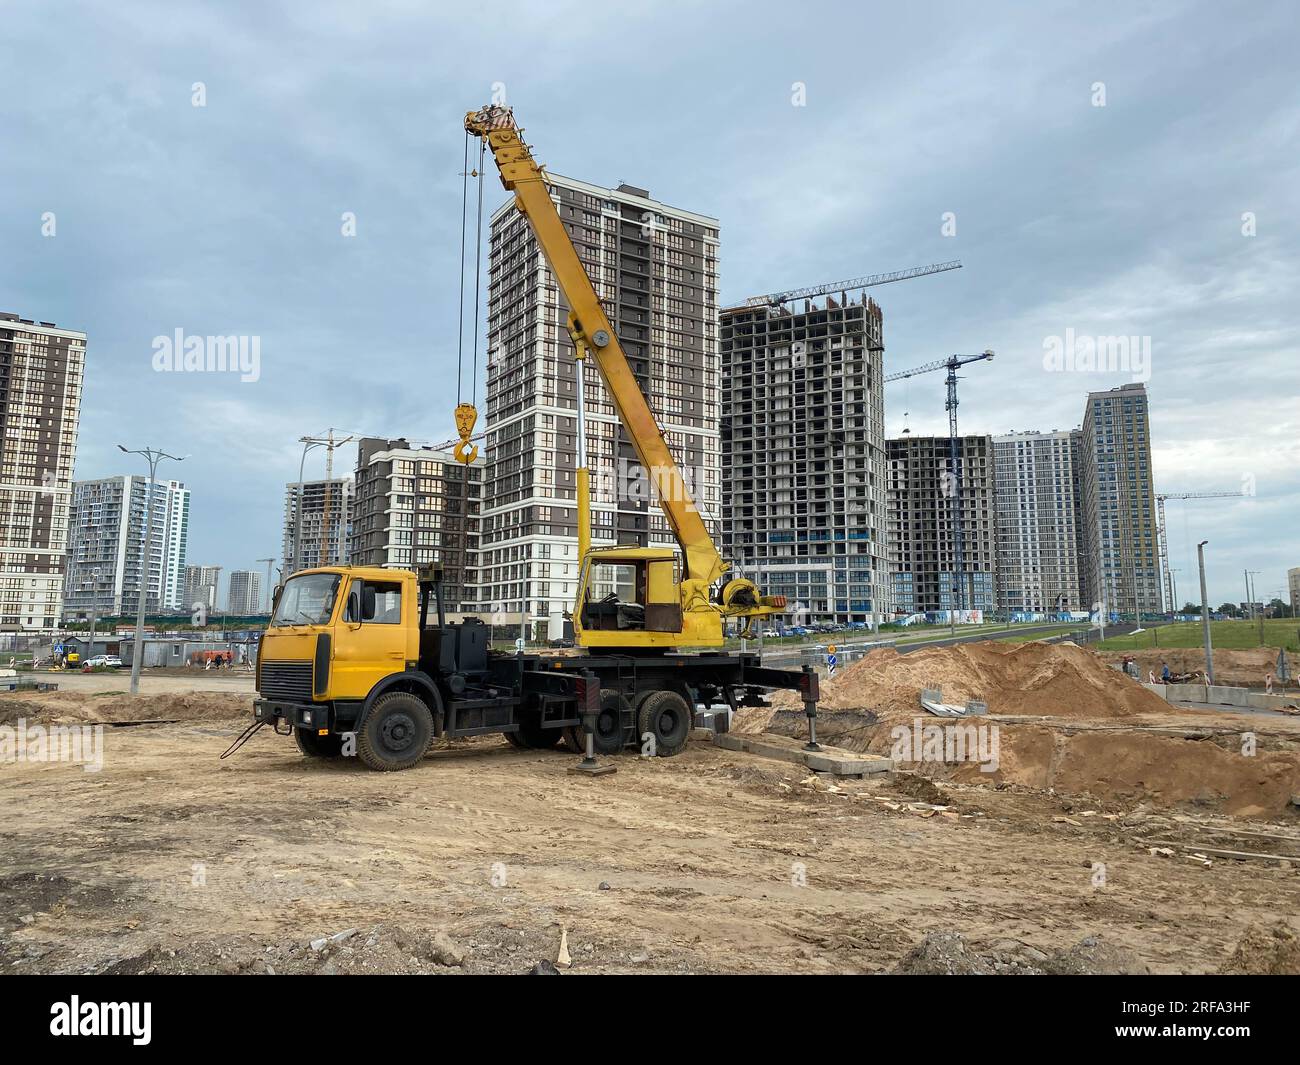 Large yellow mobility modern industrial construction crane mounted on a truck is used in the construction of new housing, houses, buildings in a big c Stock Photo